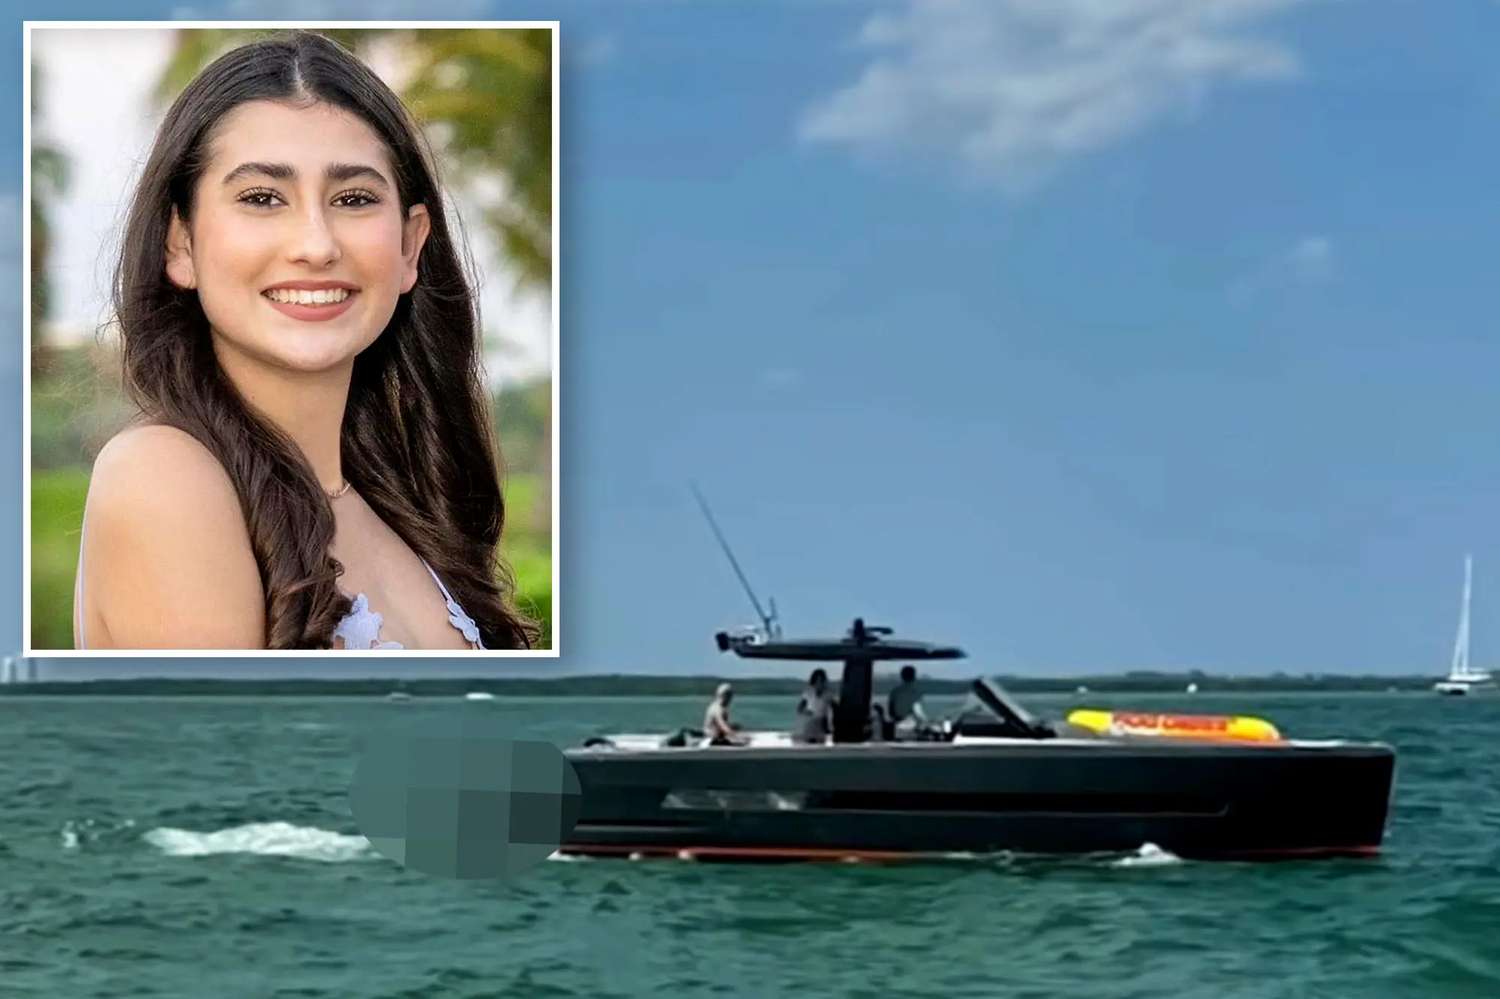 Tragic Waterskiing Accident Claims Life of Young Ballerina in Florida